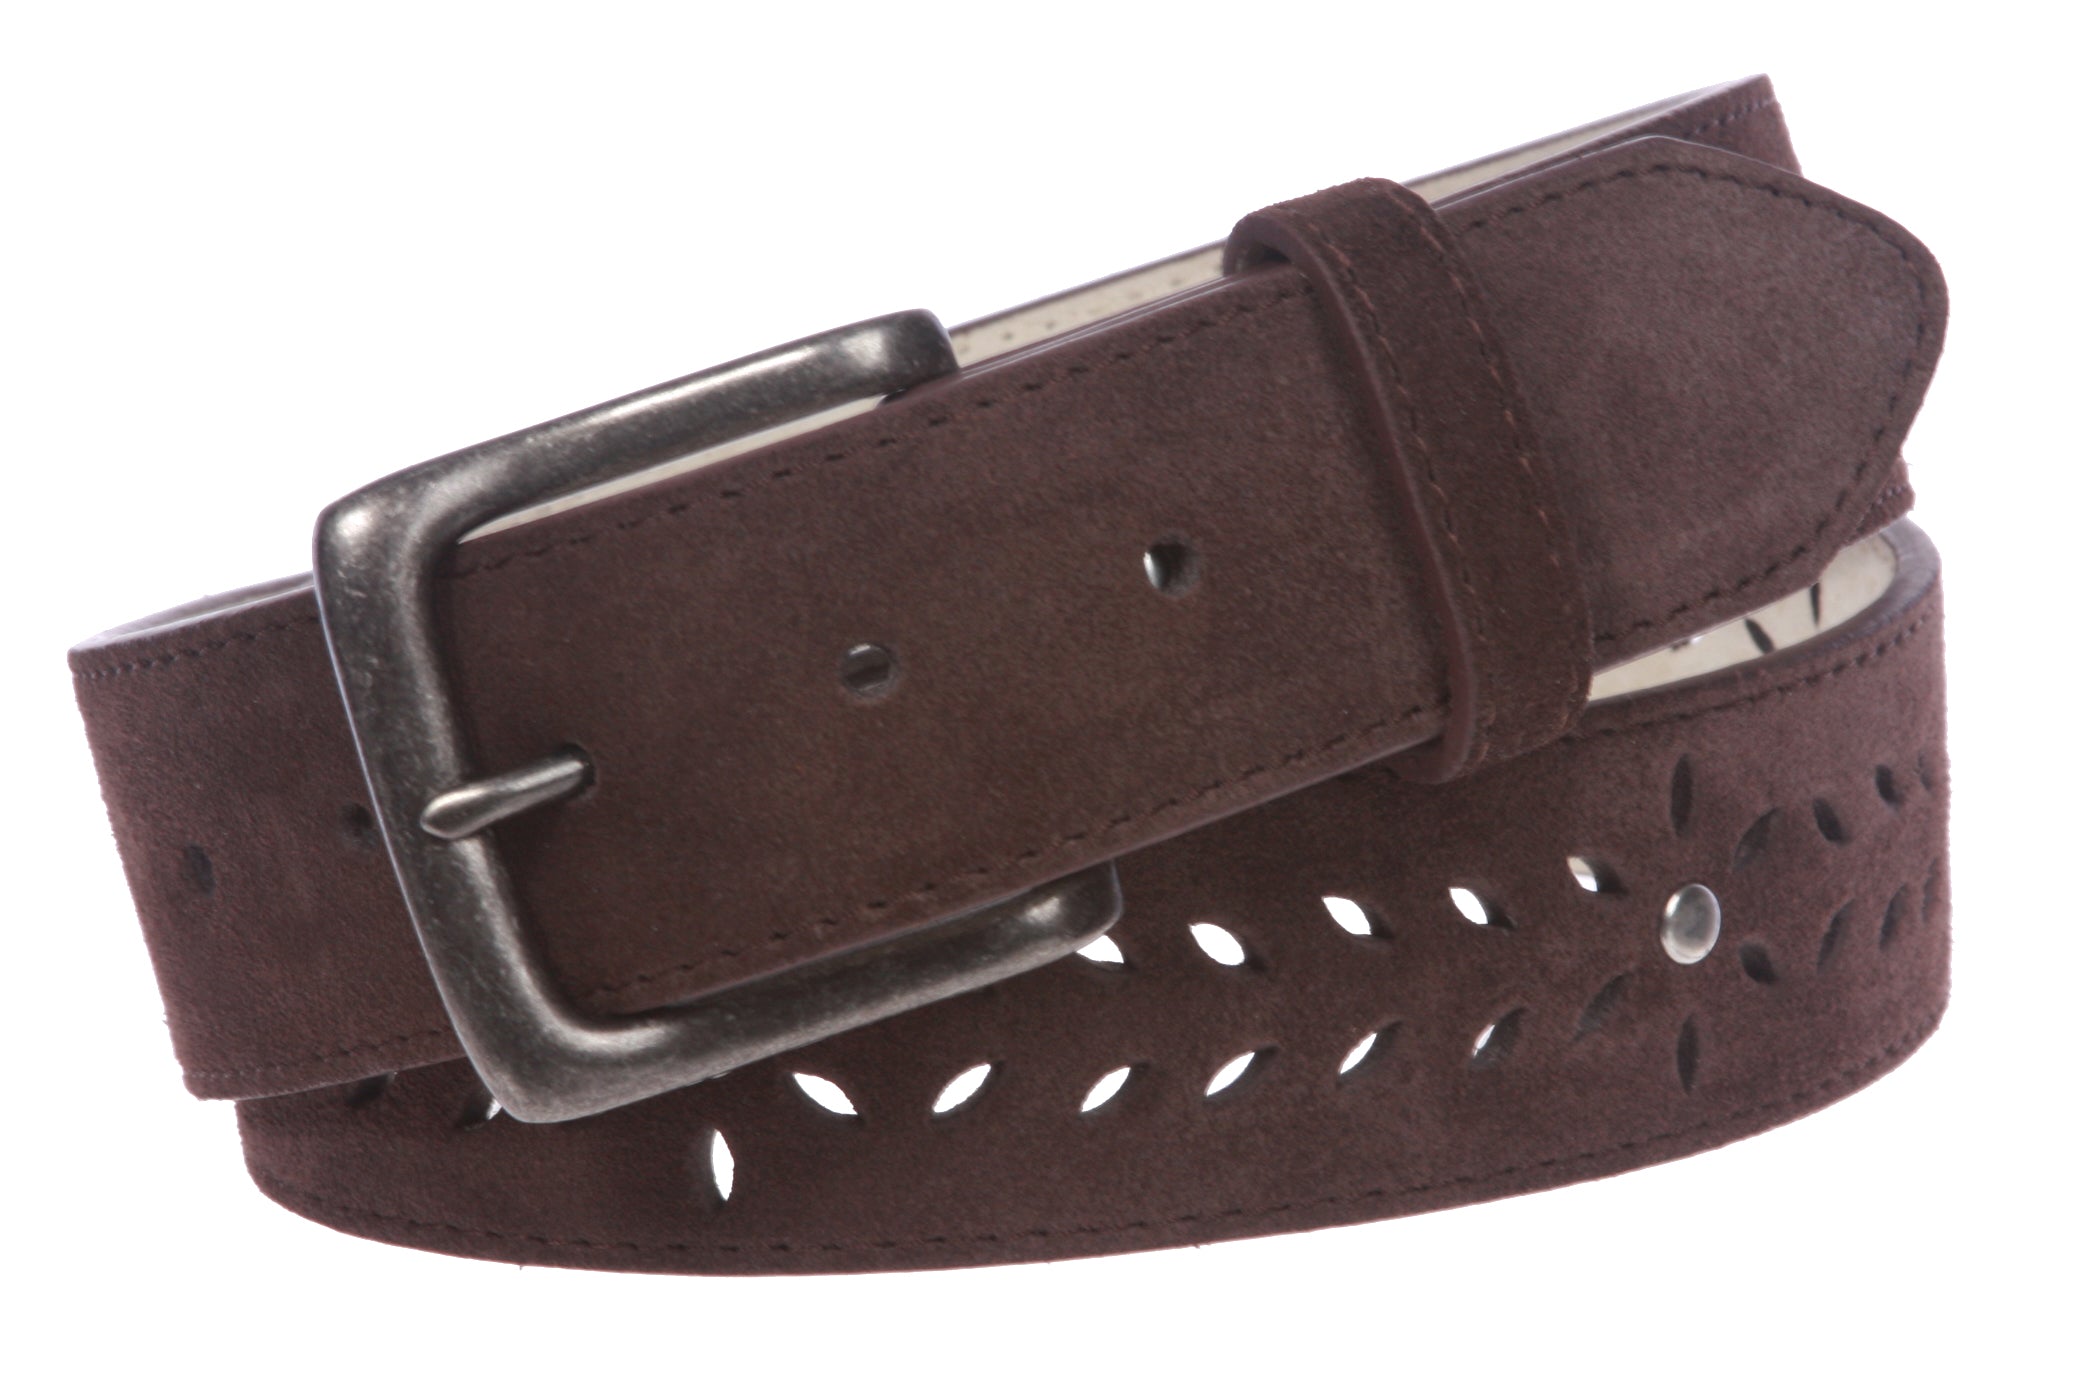 Women's 1 1/2" (38 mm) Snap on Suede Perforated Studded Leather Belt